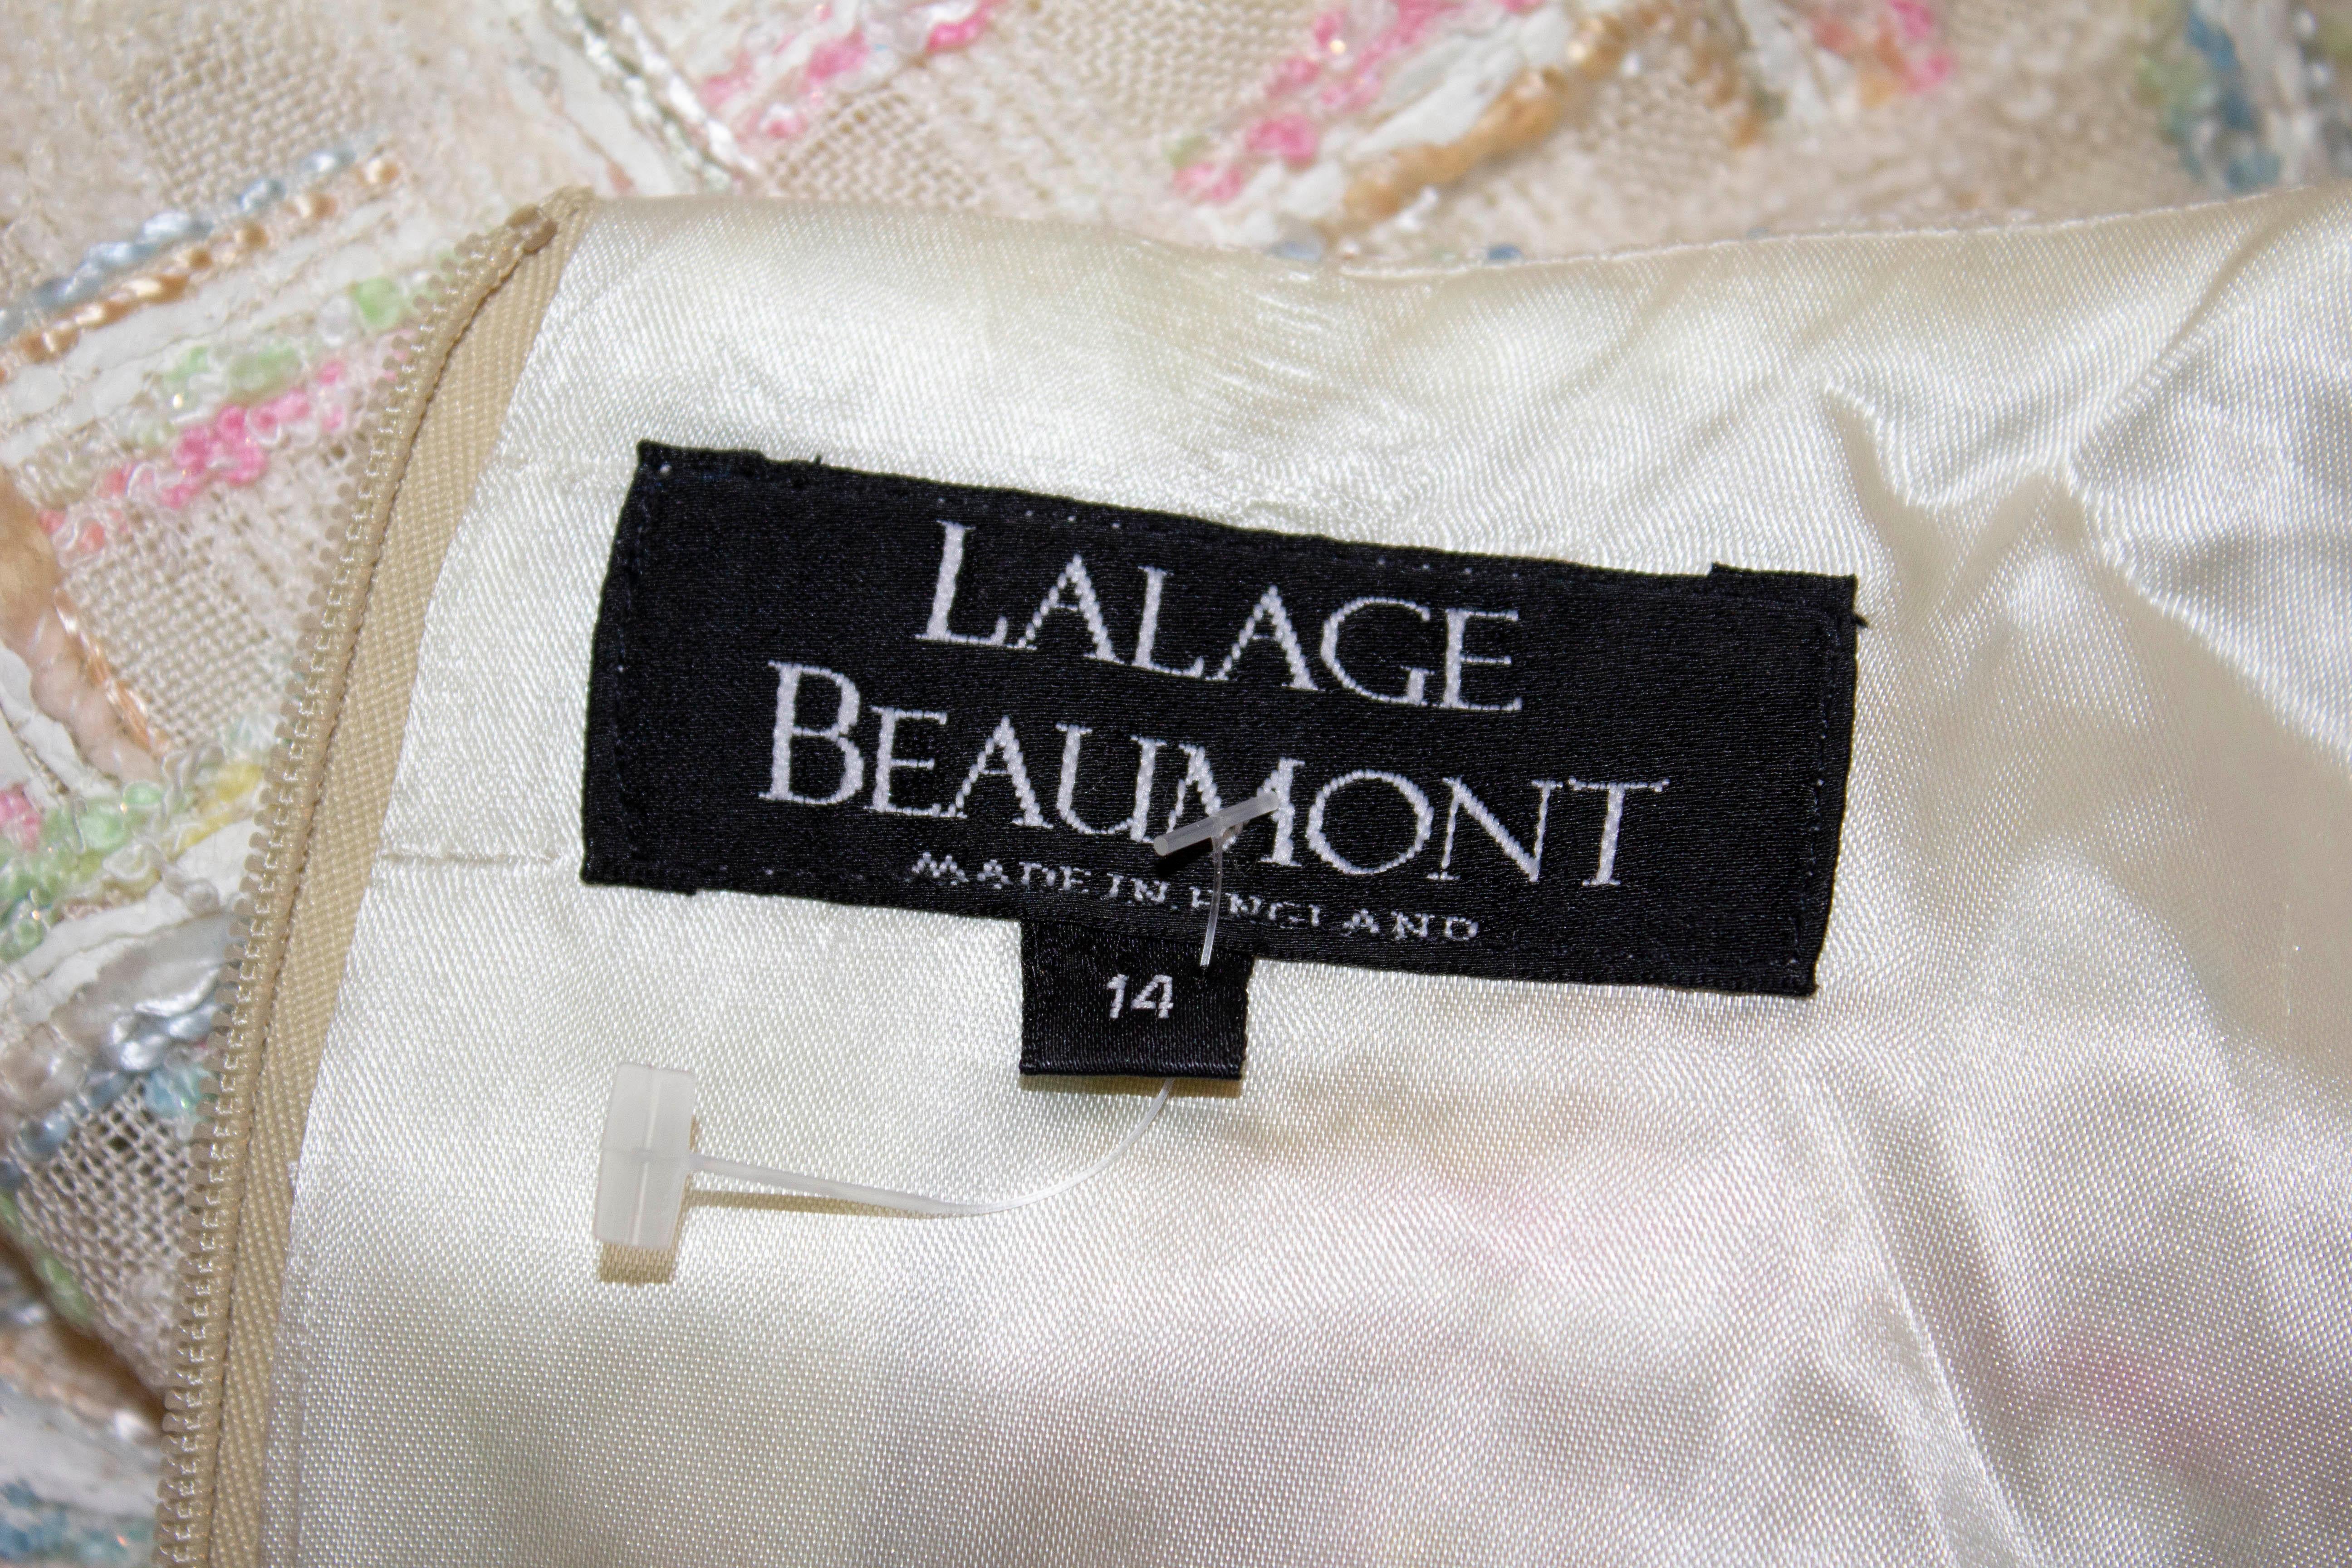 A luxurious and pretty dress for Spring / Summer from Lalage Beaumont . The dress has an ivory background with pink and blue tweed mix. It is fully lined, with elbow length sleaves and a 7 1/2'' slit at the back. Measurements: Bust 36'', waist